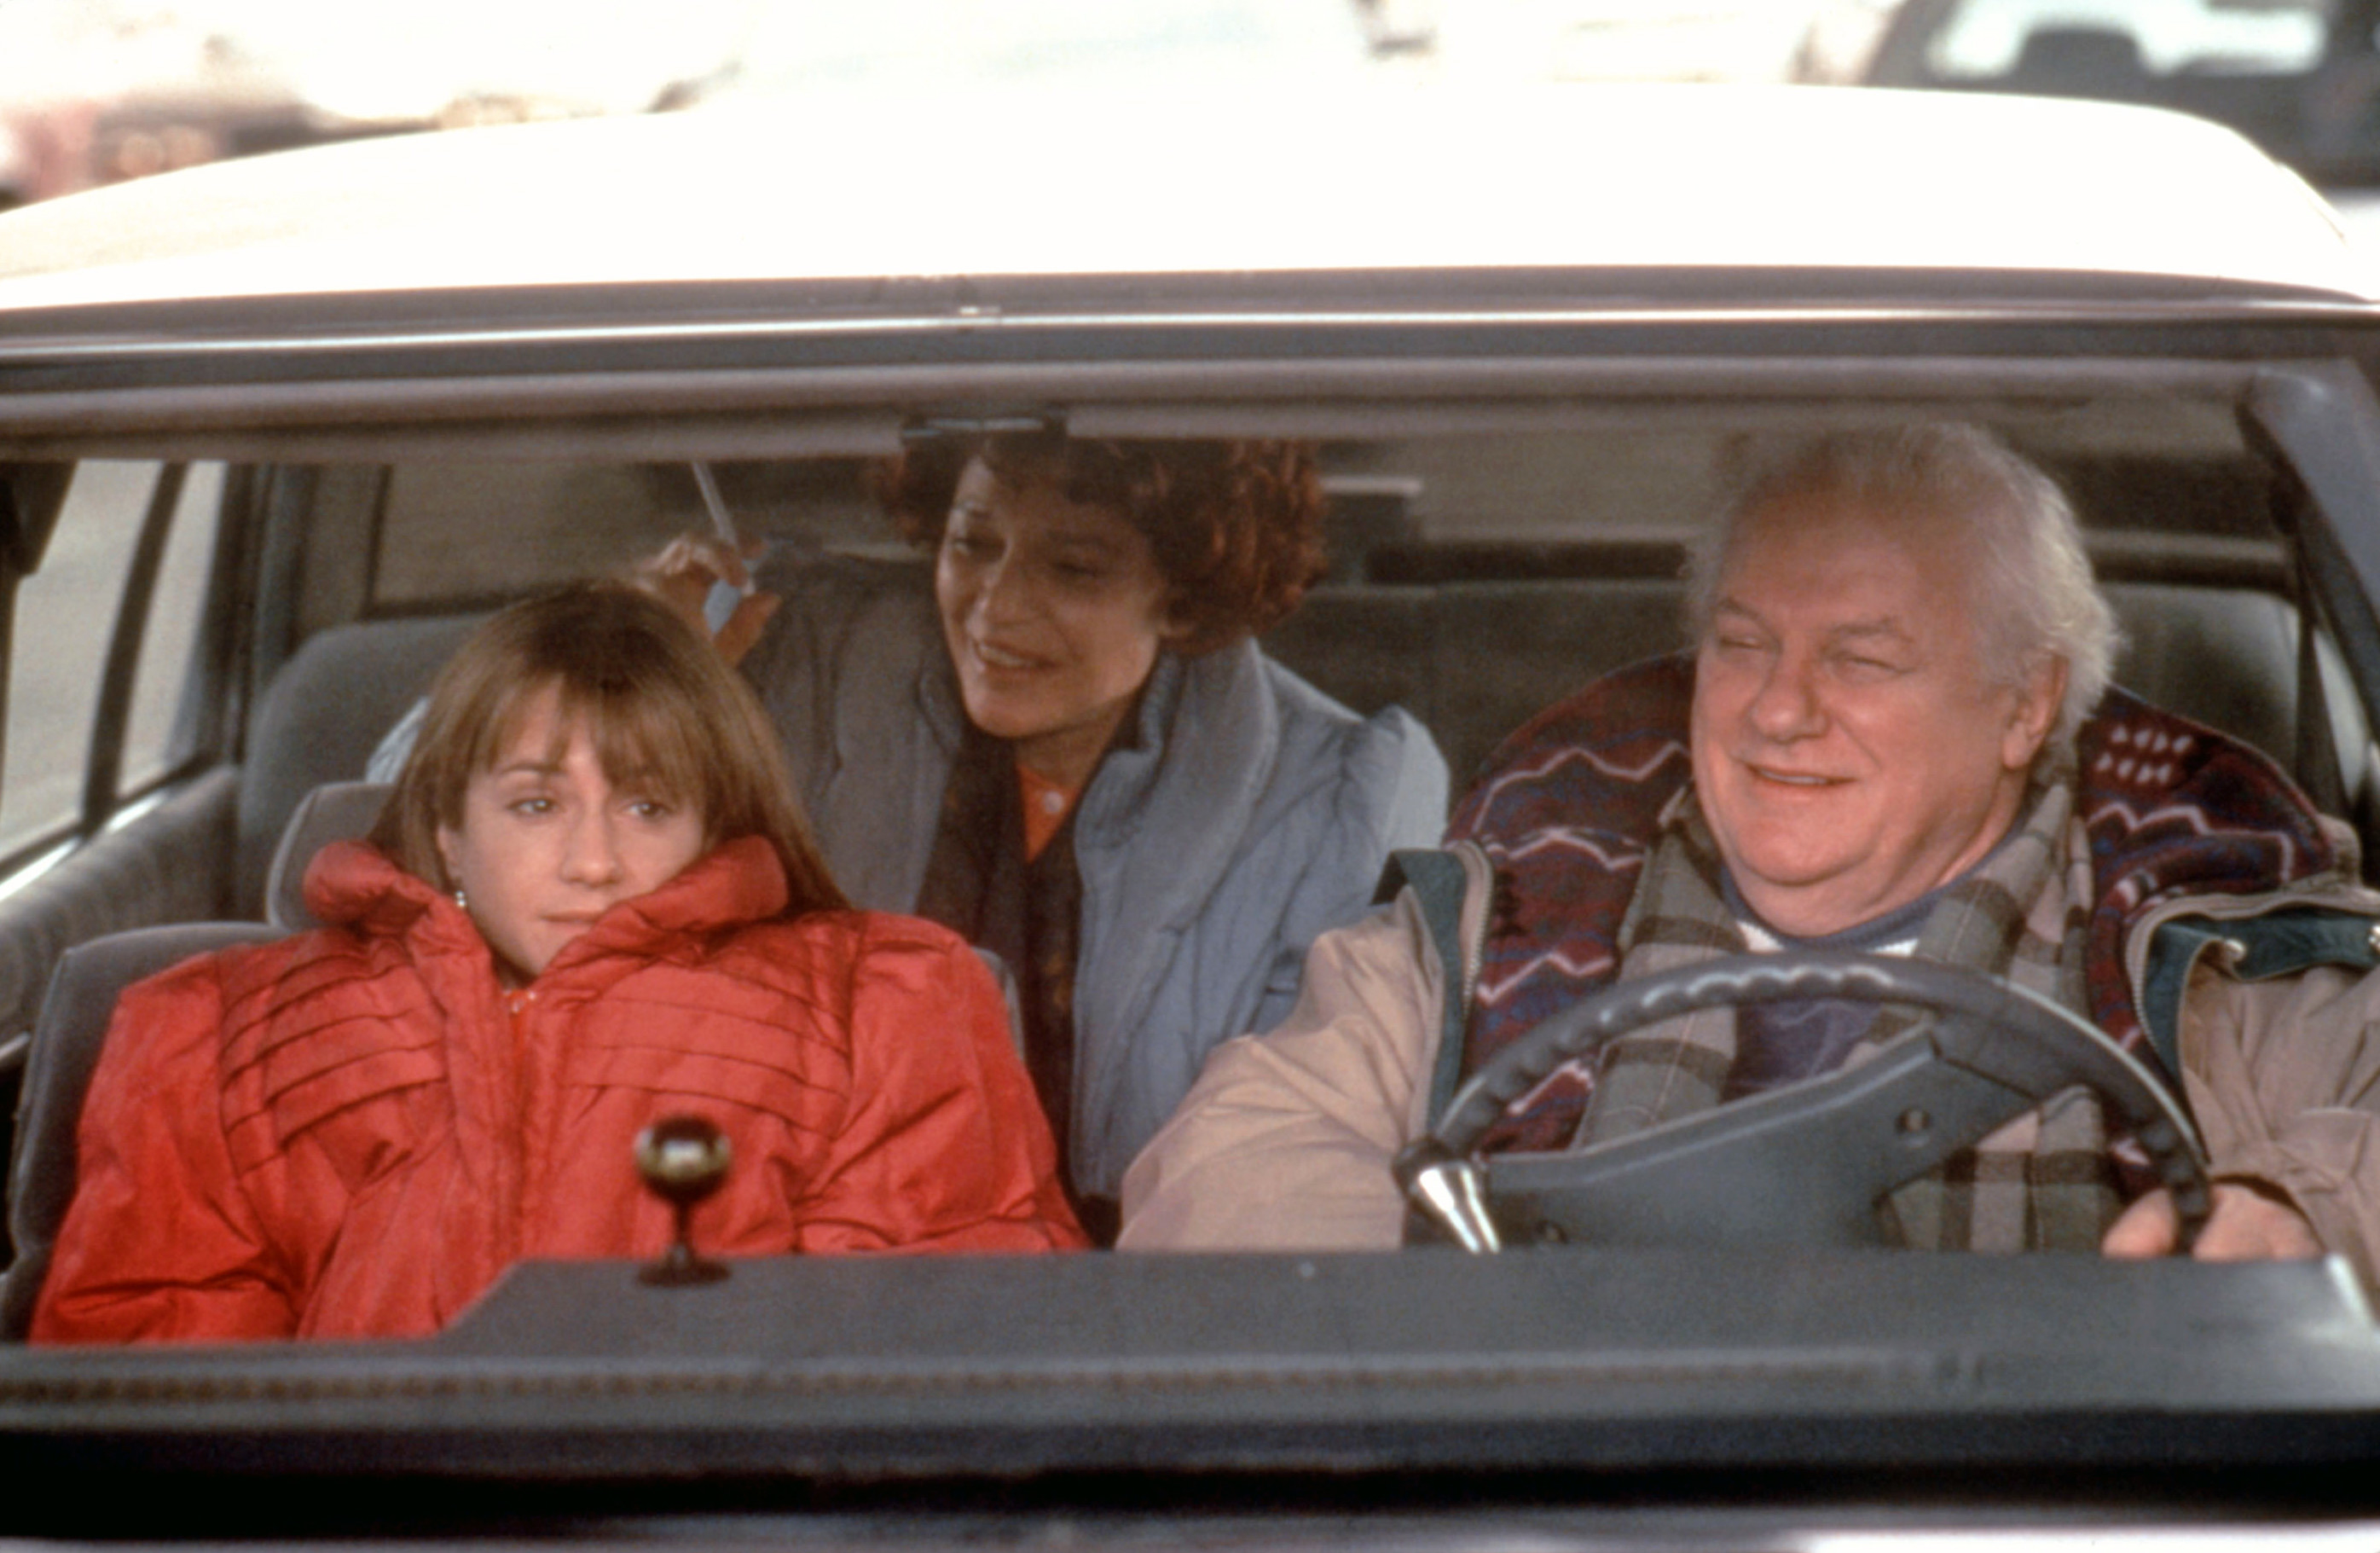 Holly Hunter, Charles Denning, and Anne Bancroft in a car.